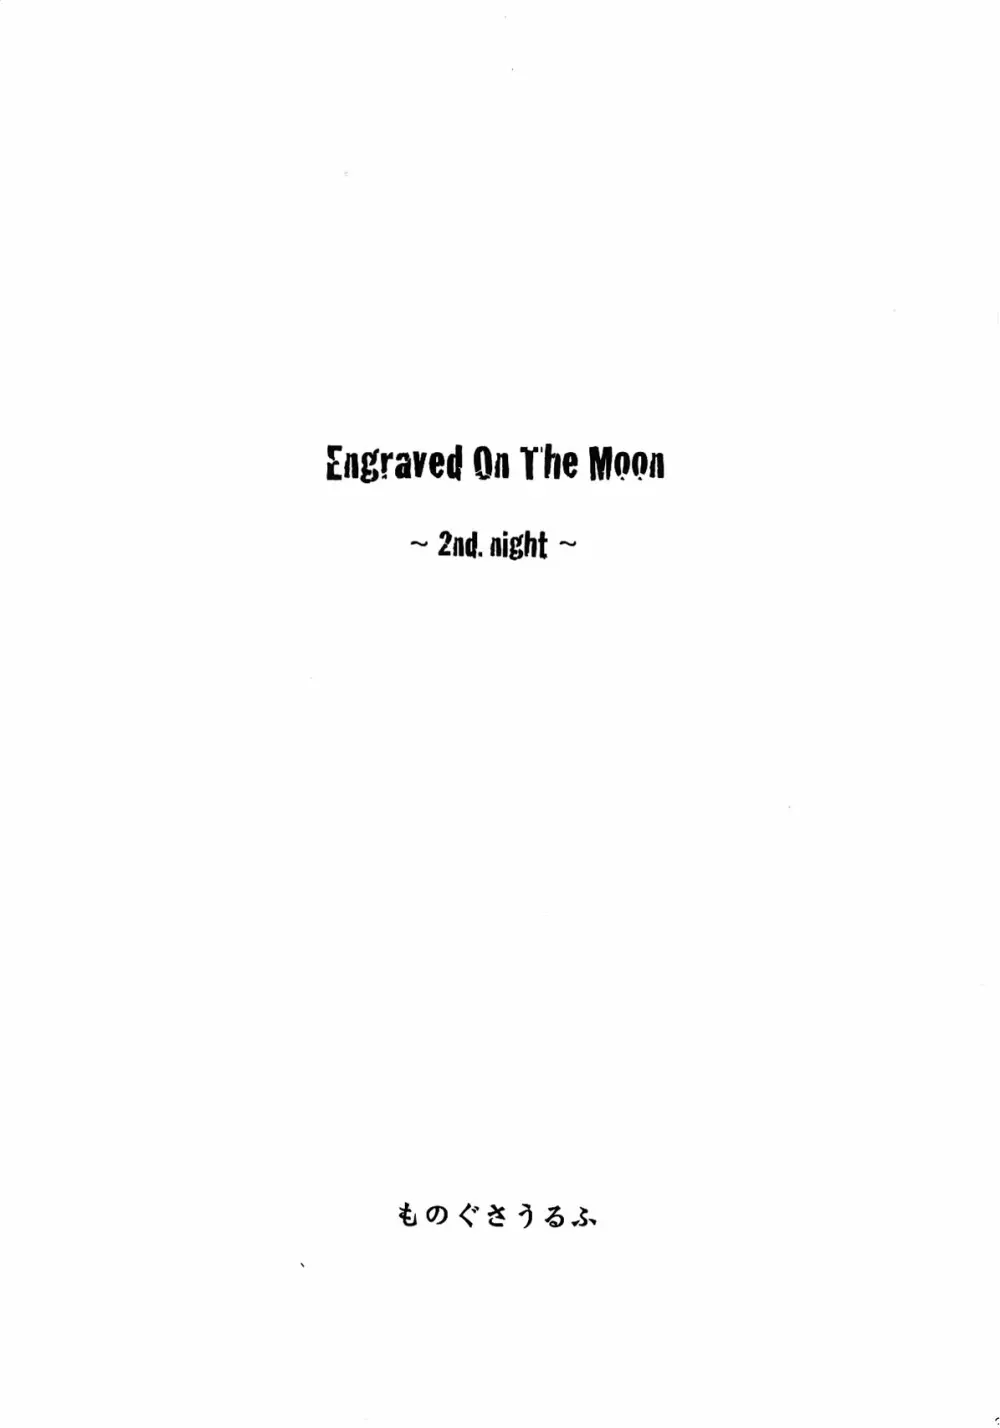 Engraved on the Moon 1st Night/2nd Night/3rd Night - page27